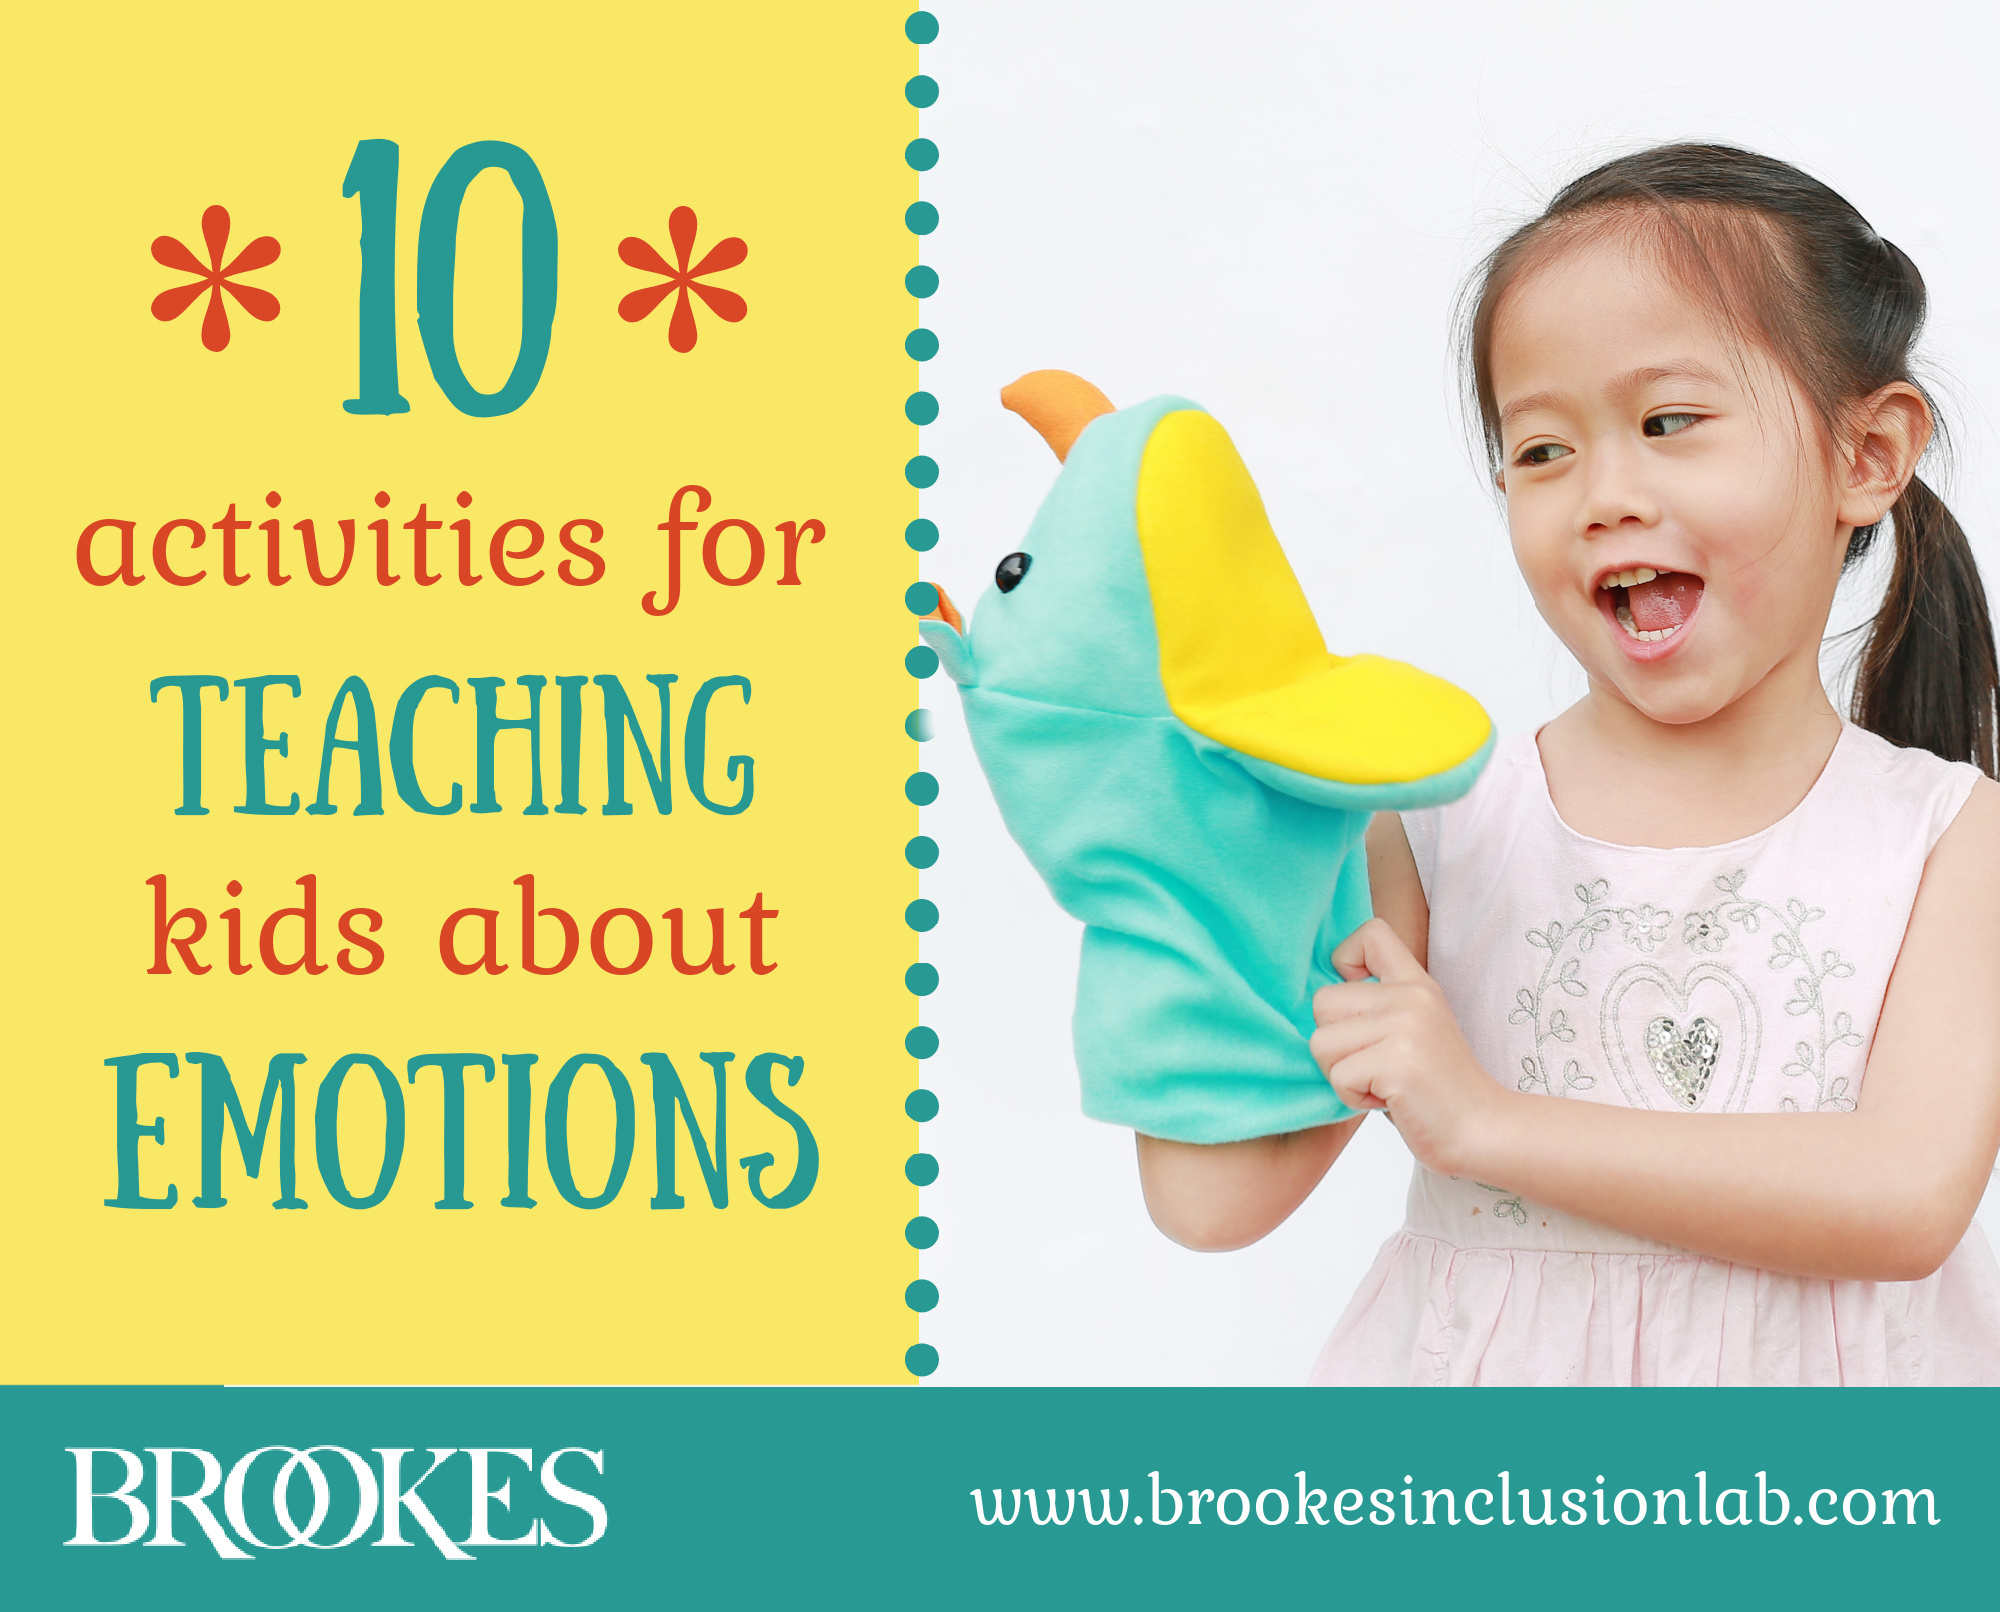 10 Activities for Teaching Young Children About Emotions - Brookes Blog